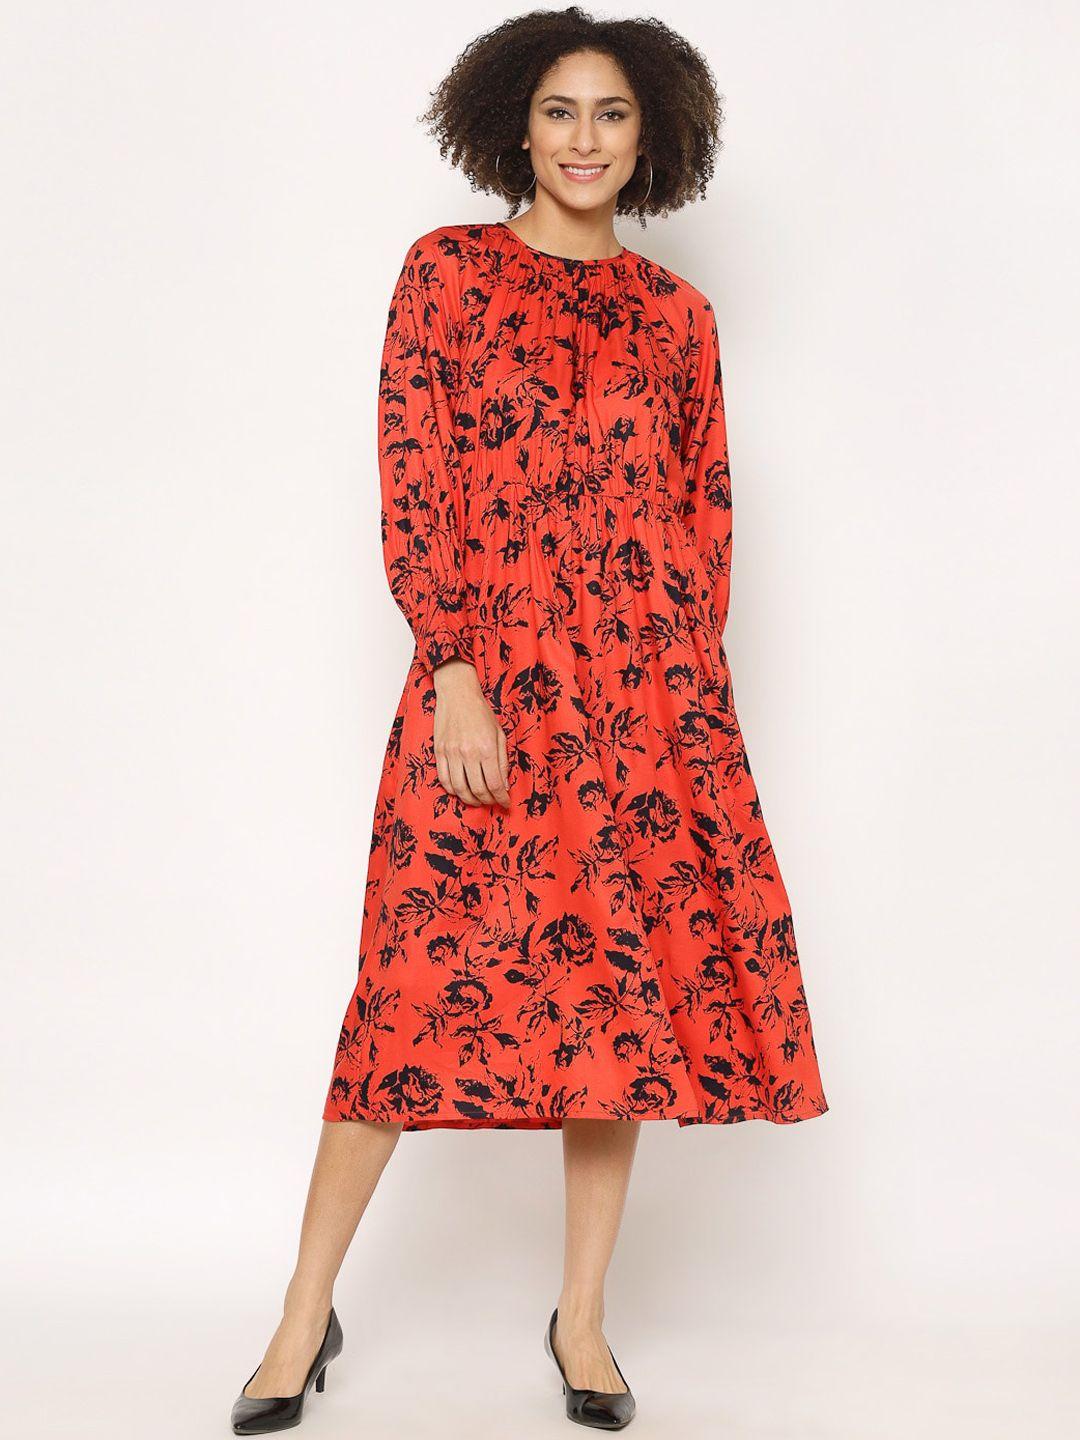 house of kkarma women red printed fit and flare dress